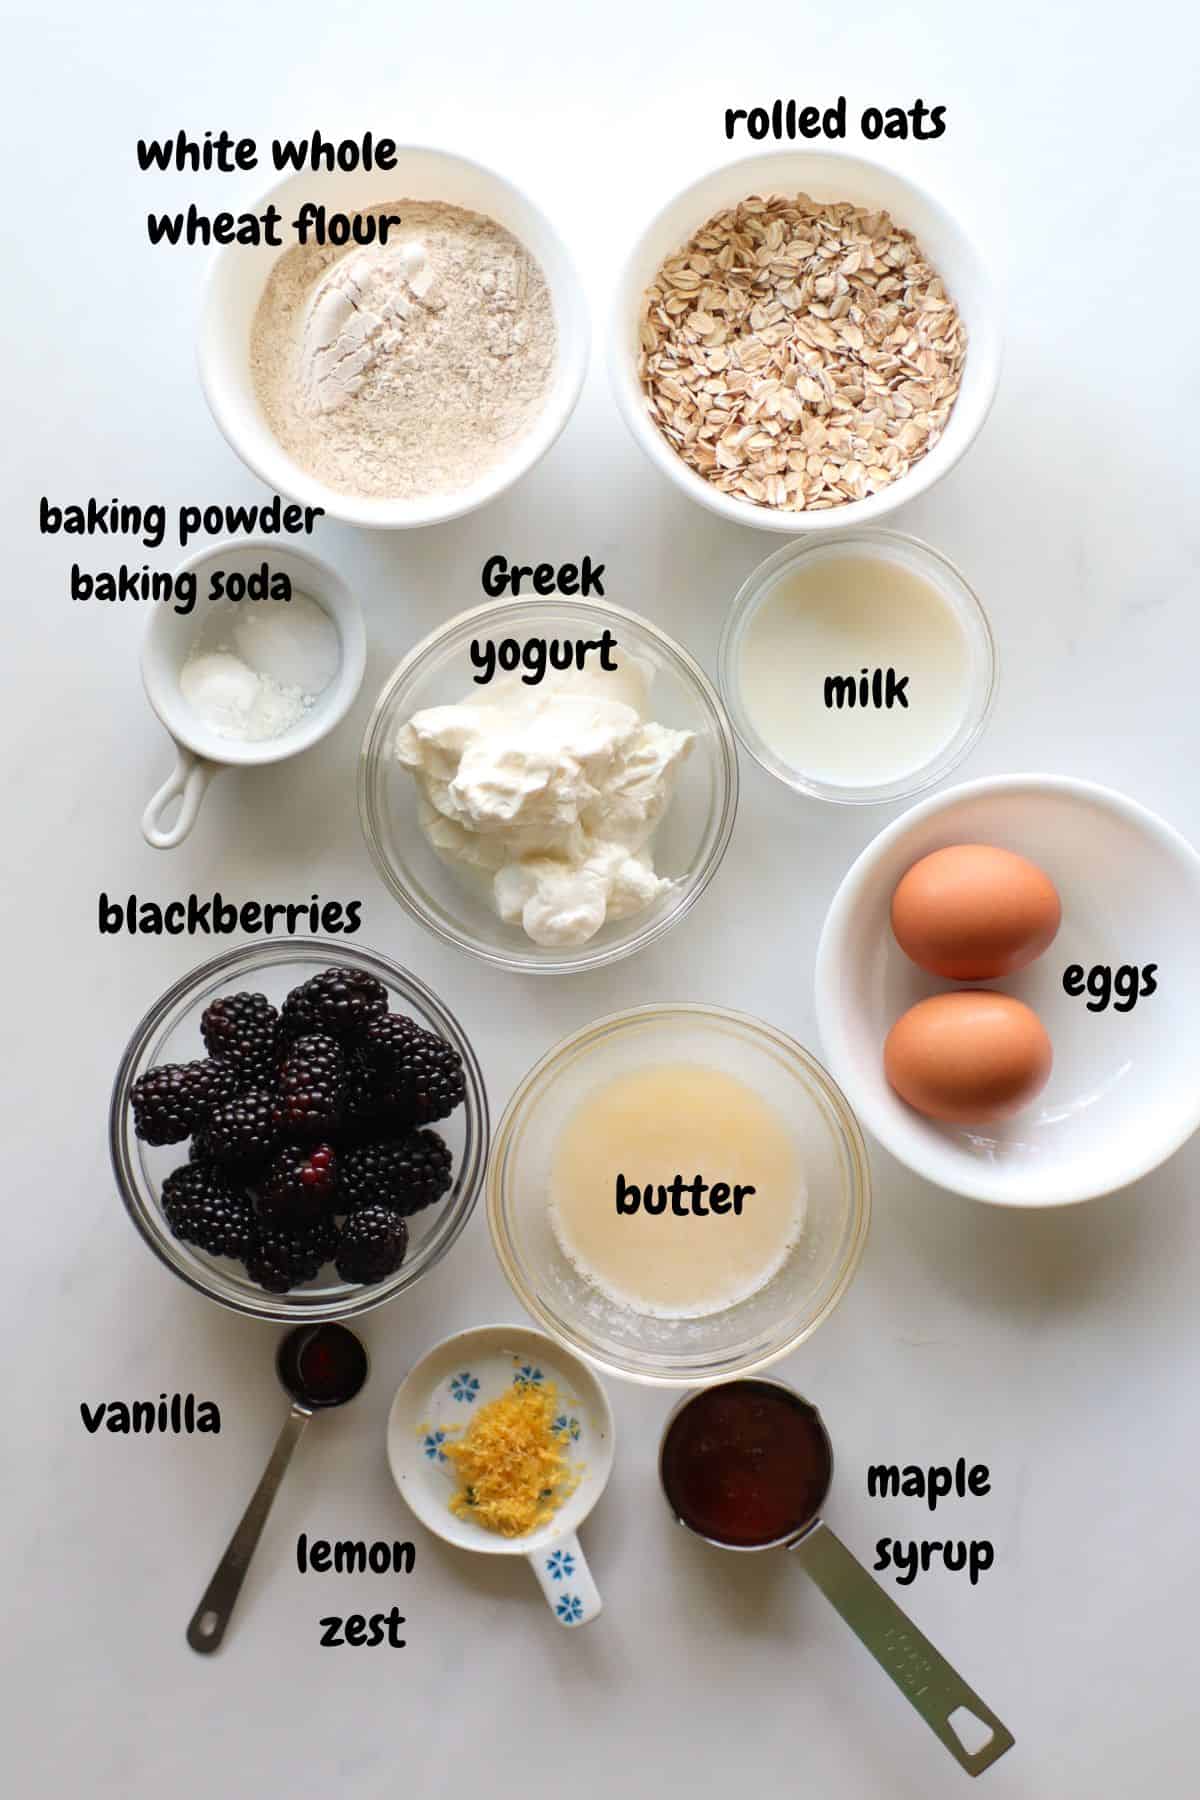 All t he ingredients laid out on a white background and labelled.